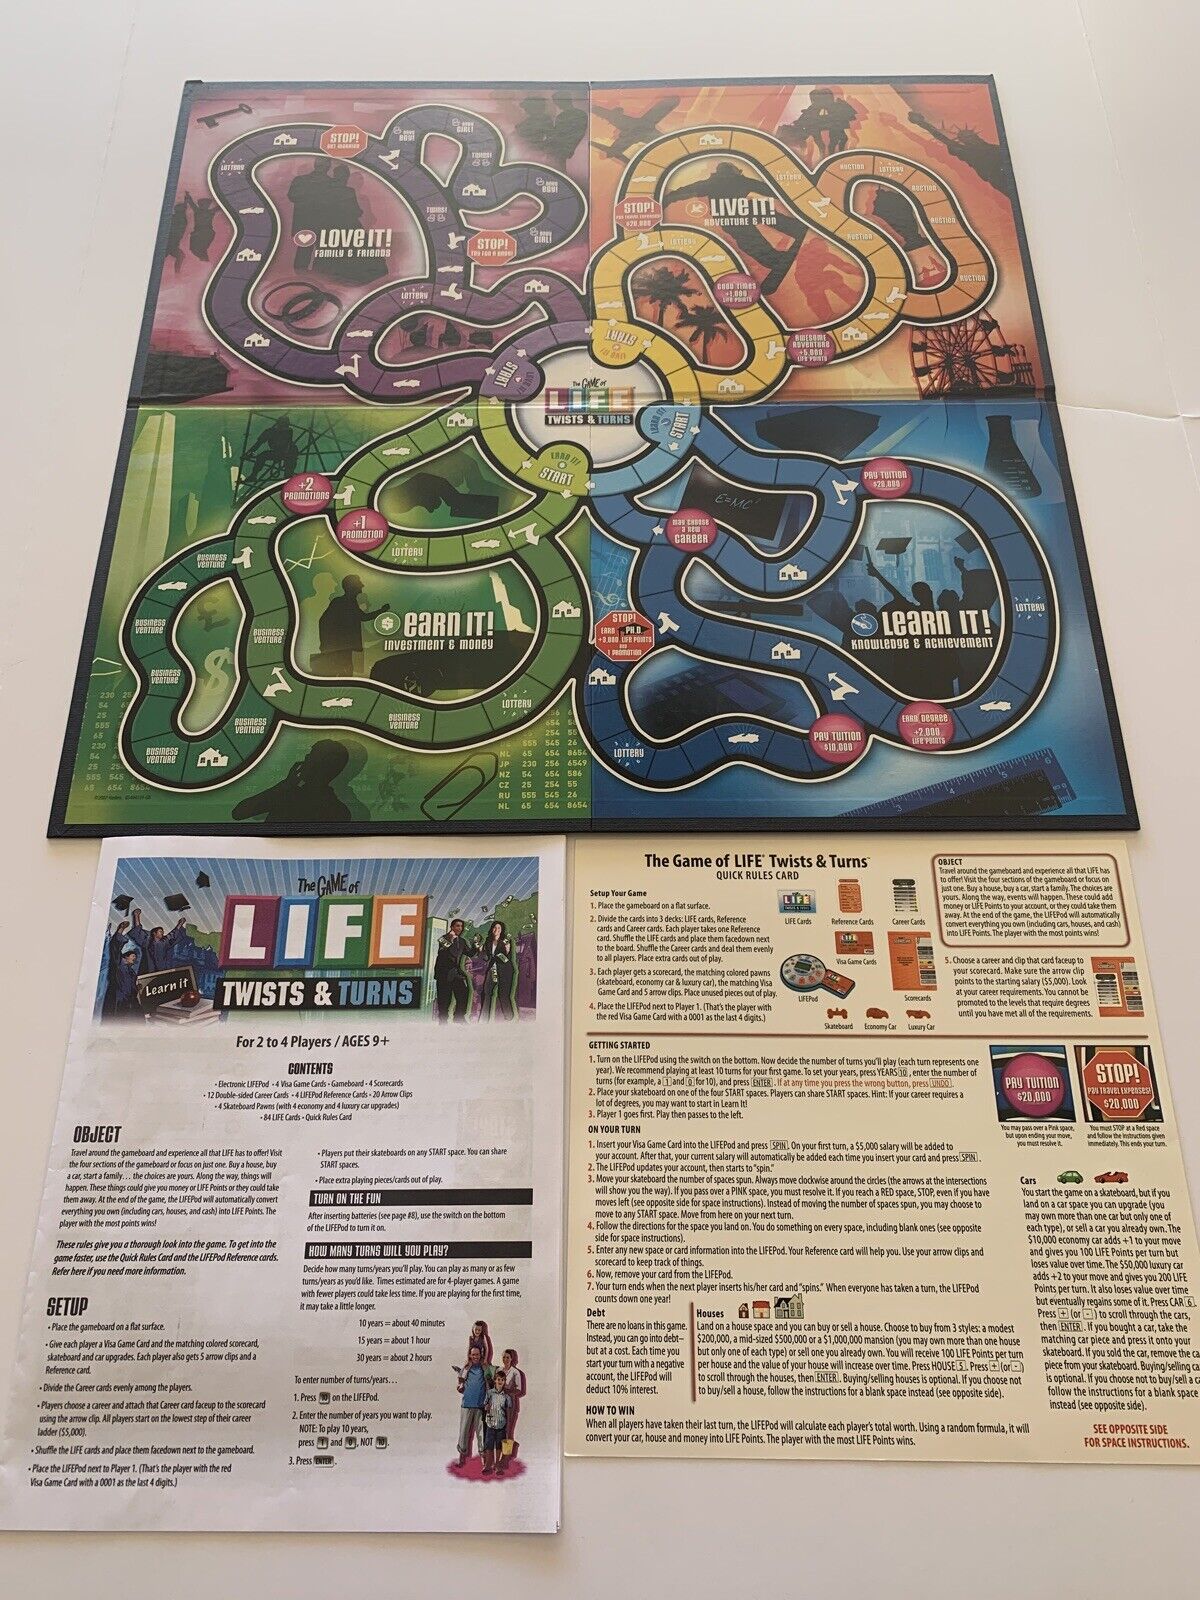 The Game of Life Twists and Turns Quick Rules Card and Game Board 2007